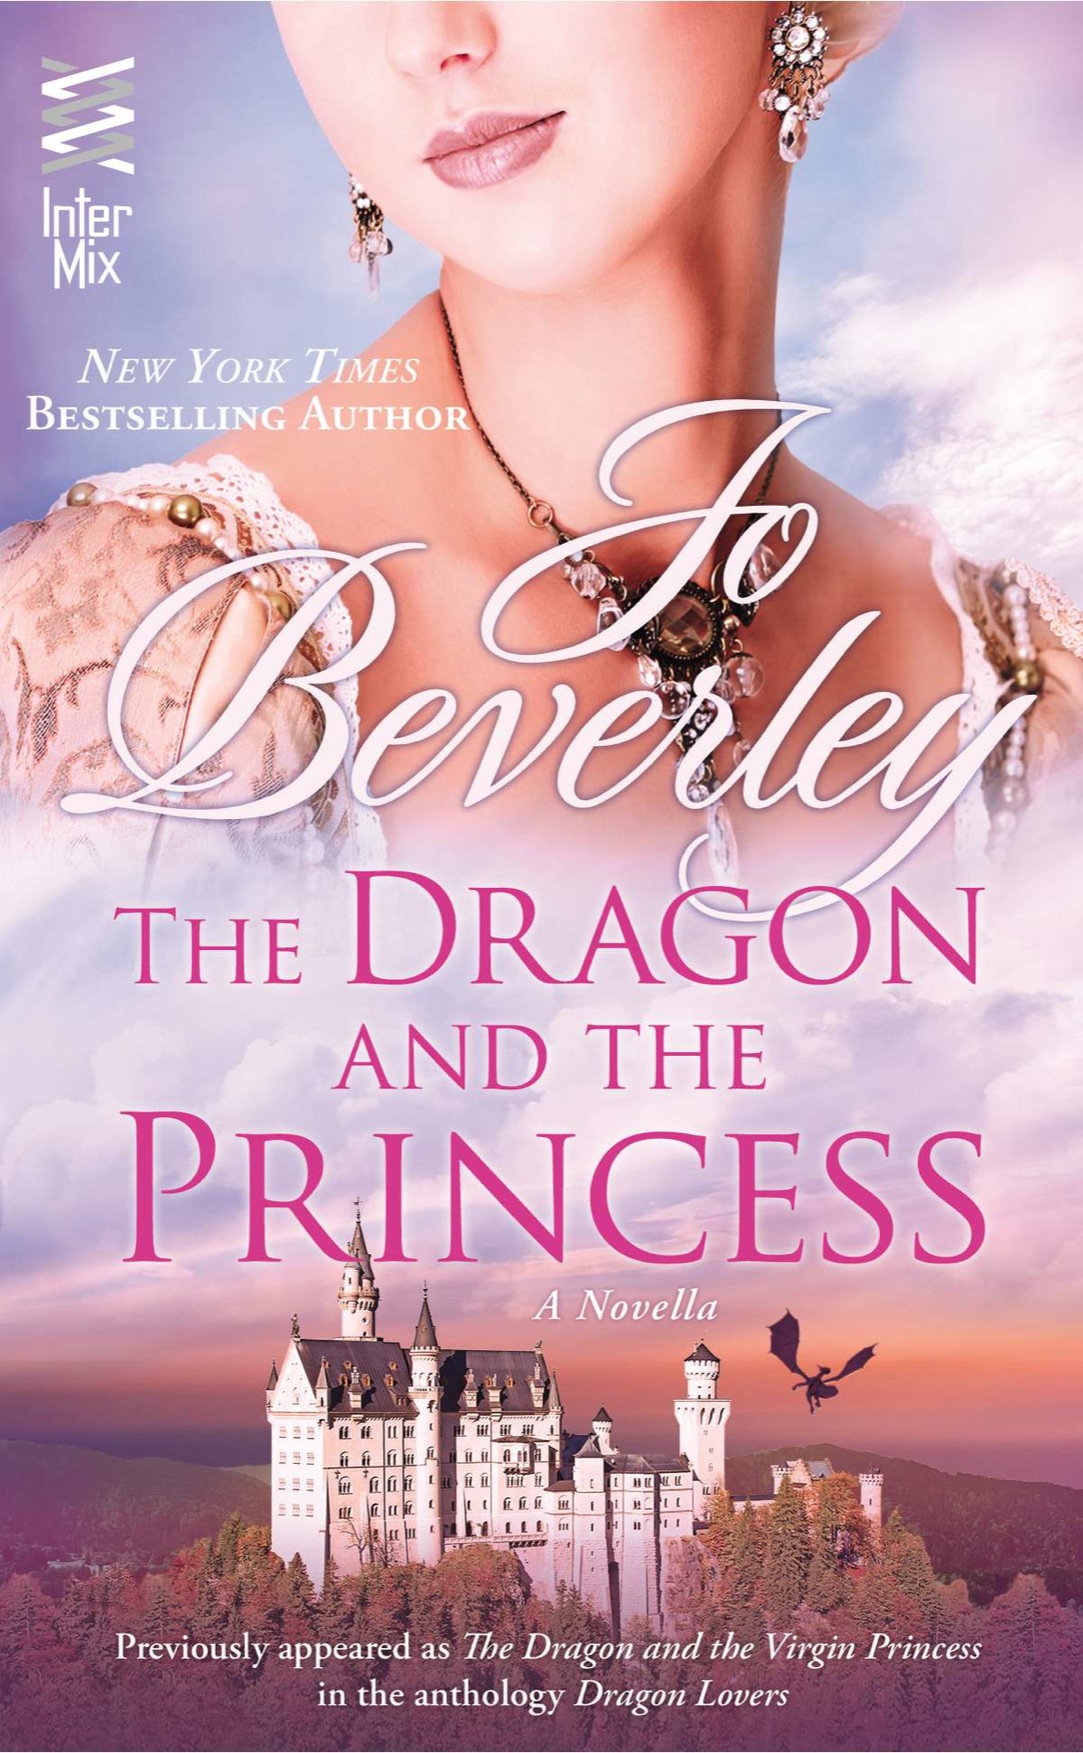 Dragon and the Princess (2014) by Jo Beverley